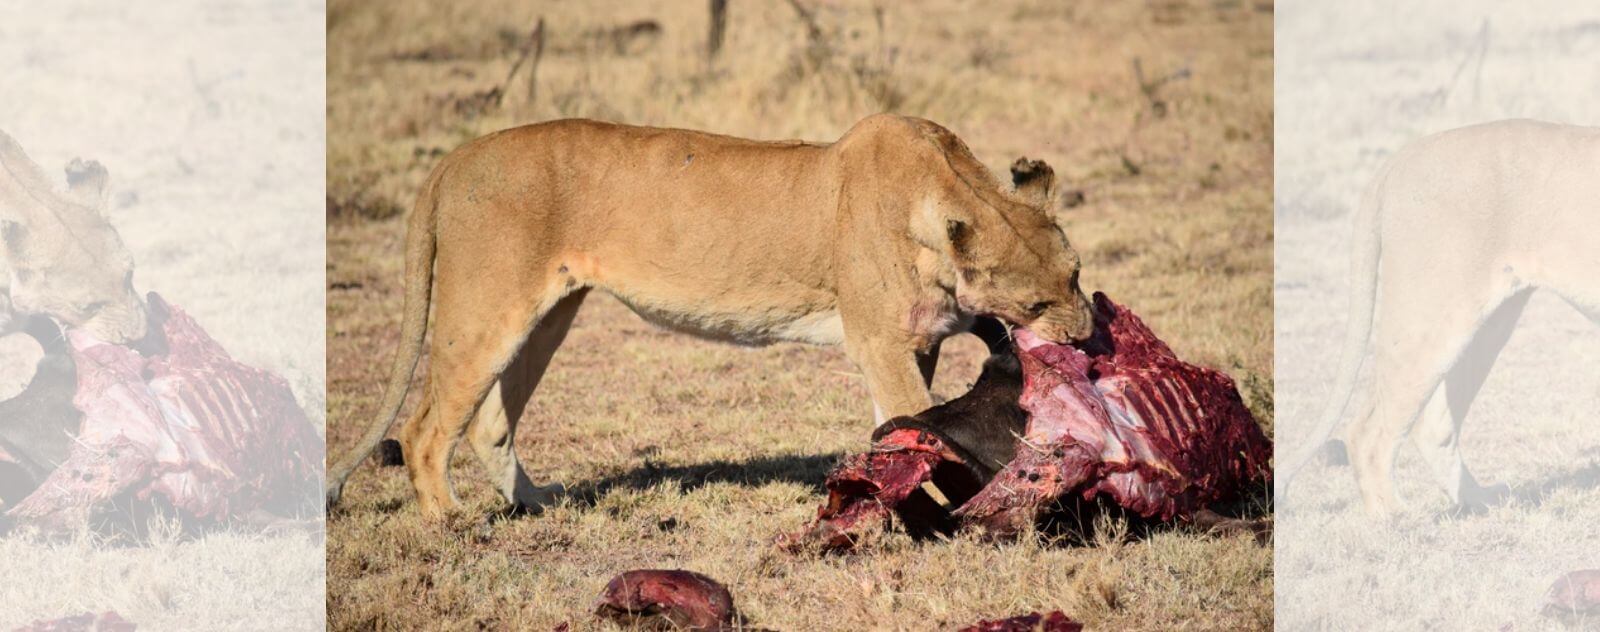 Lioness Eating Meat Carcass